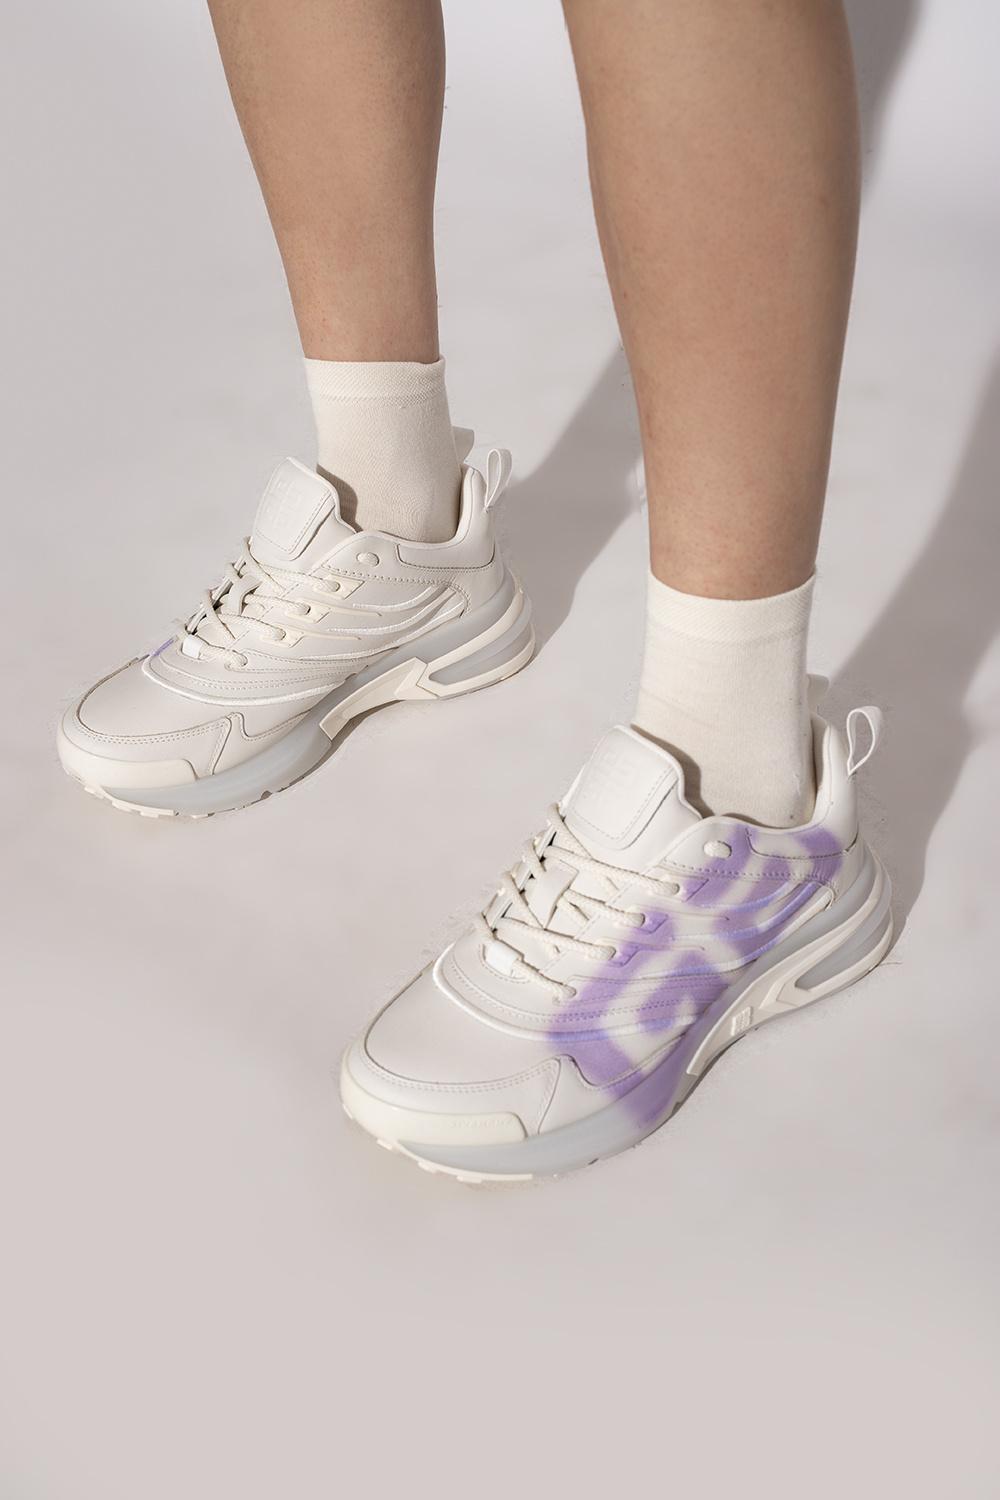 Givenchy 'giv 1' Sneakers in White | Lyst